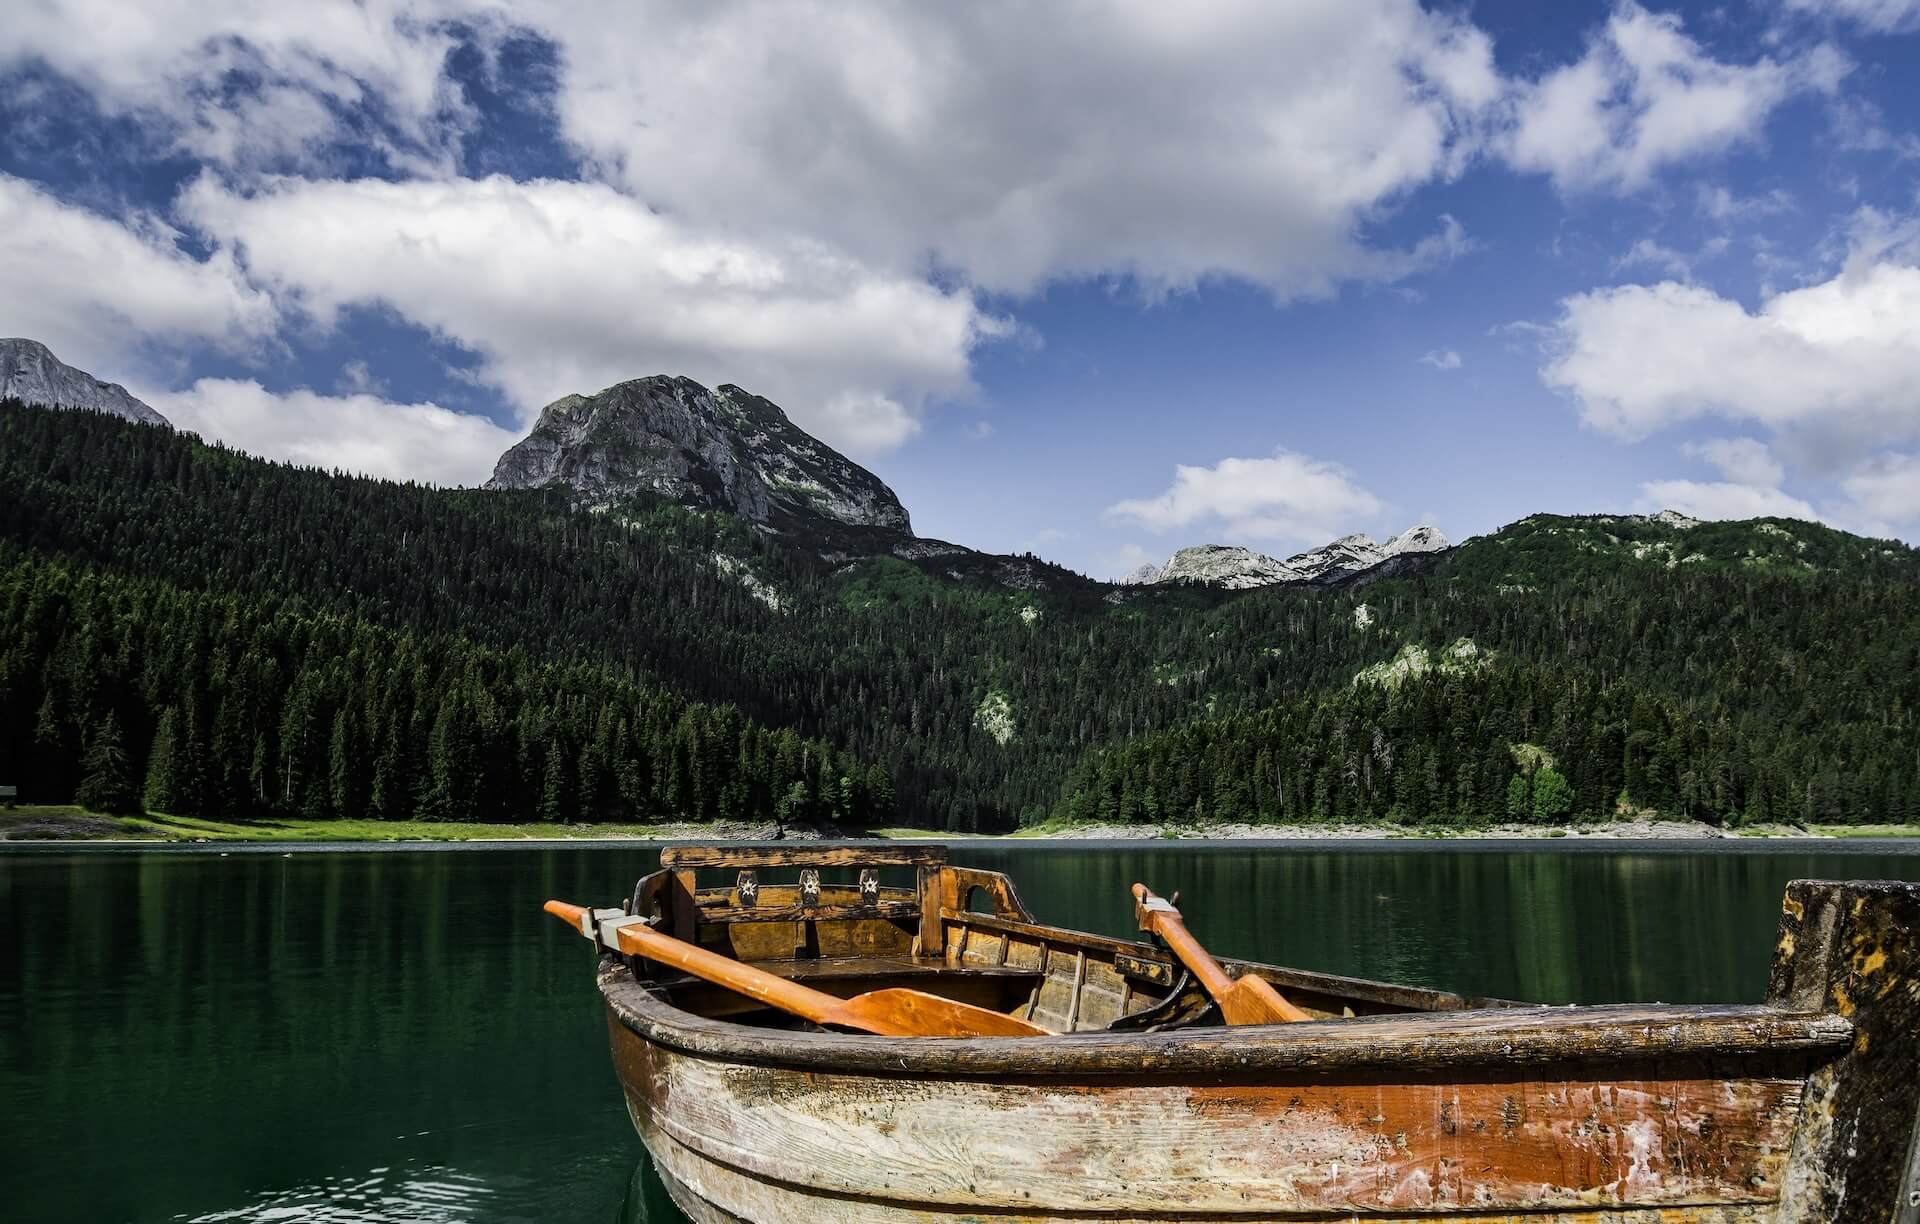 Guide to Montenegro - A view of Black Lake in Durmitor National Park